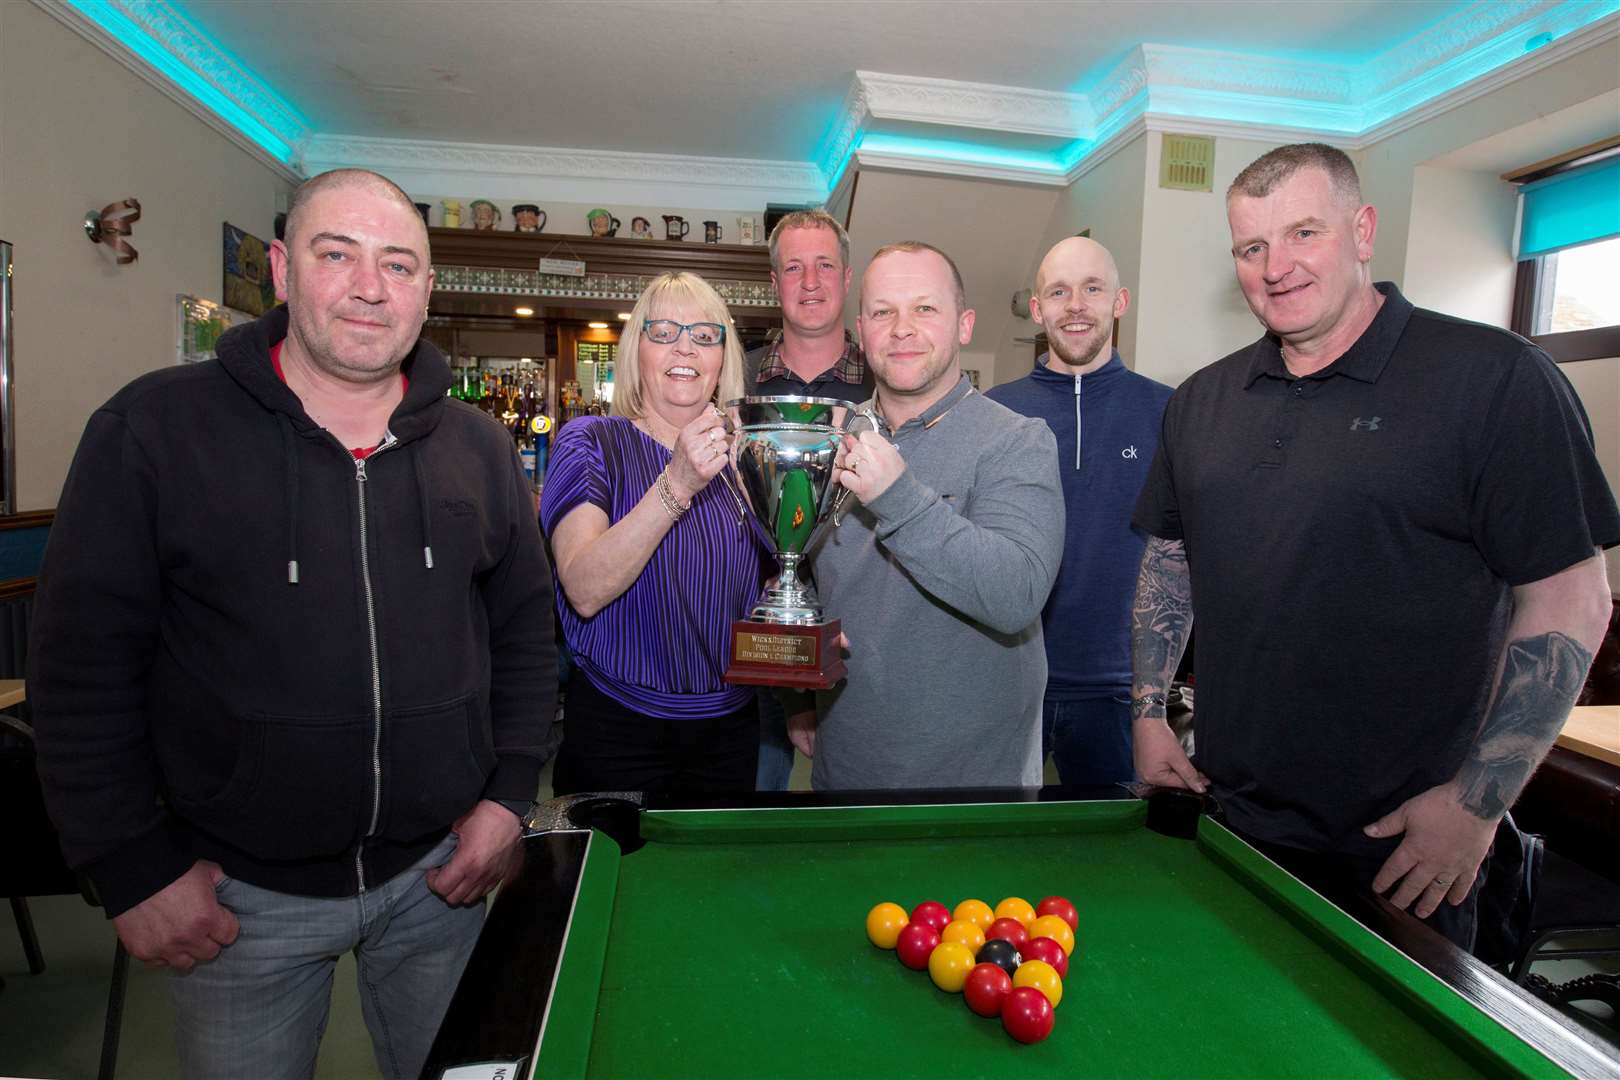 Crown Bar owner Lynda Donn handing over the pool league trophy to team captain Colin Banks, while looking on are (from left) Martin Hill, Alan Stewart, Kevin Cameron and Tam Mulraine. Picture: Robert MacDonald / Northern Studios